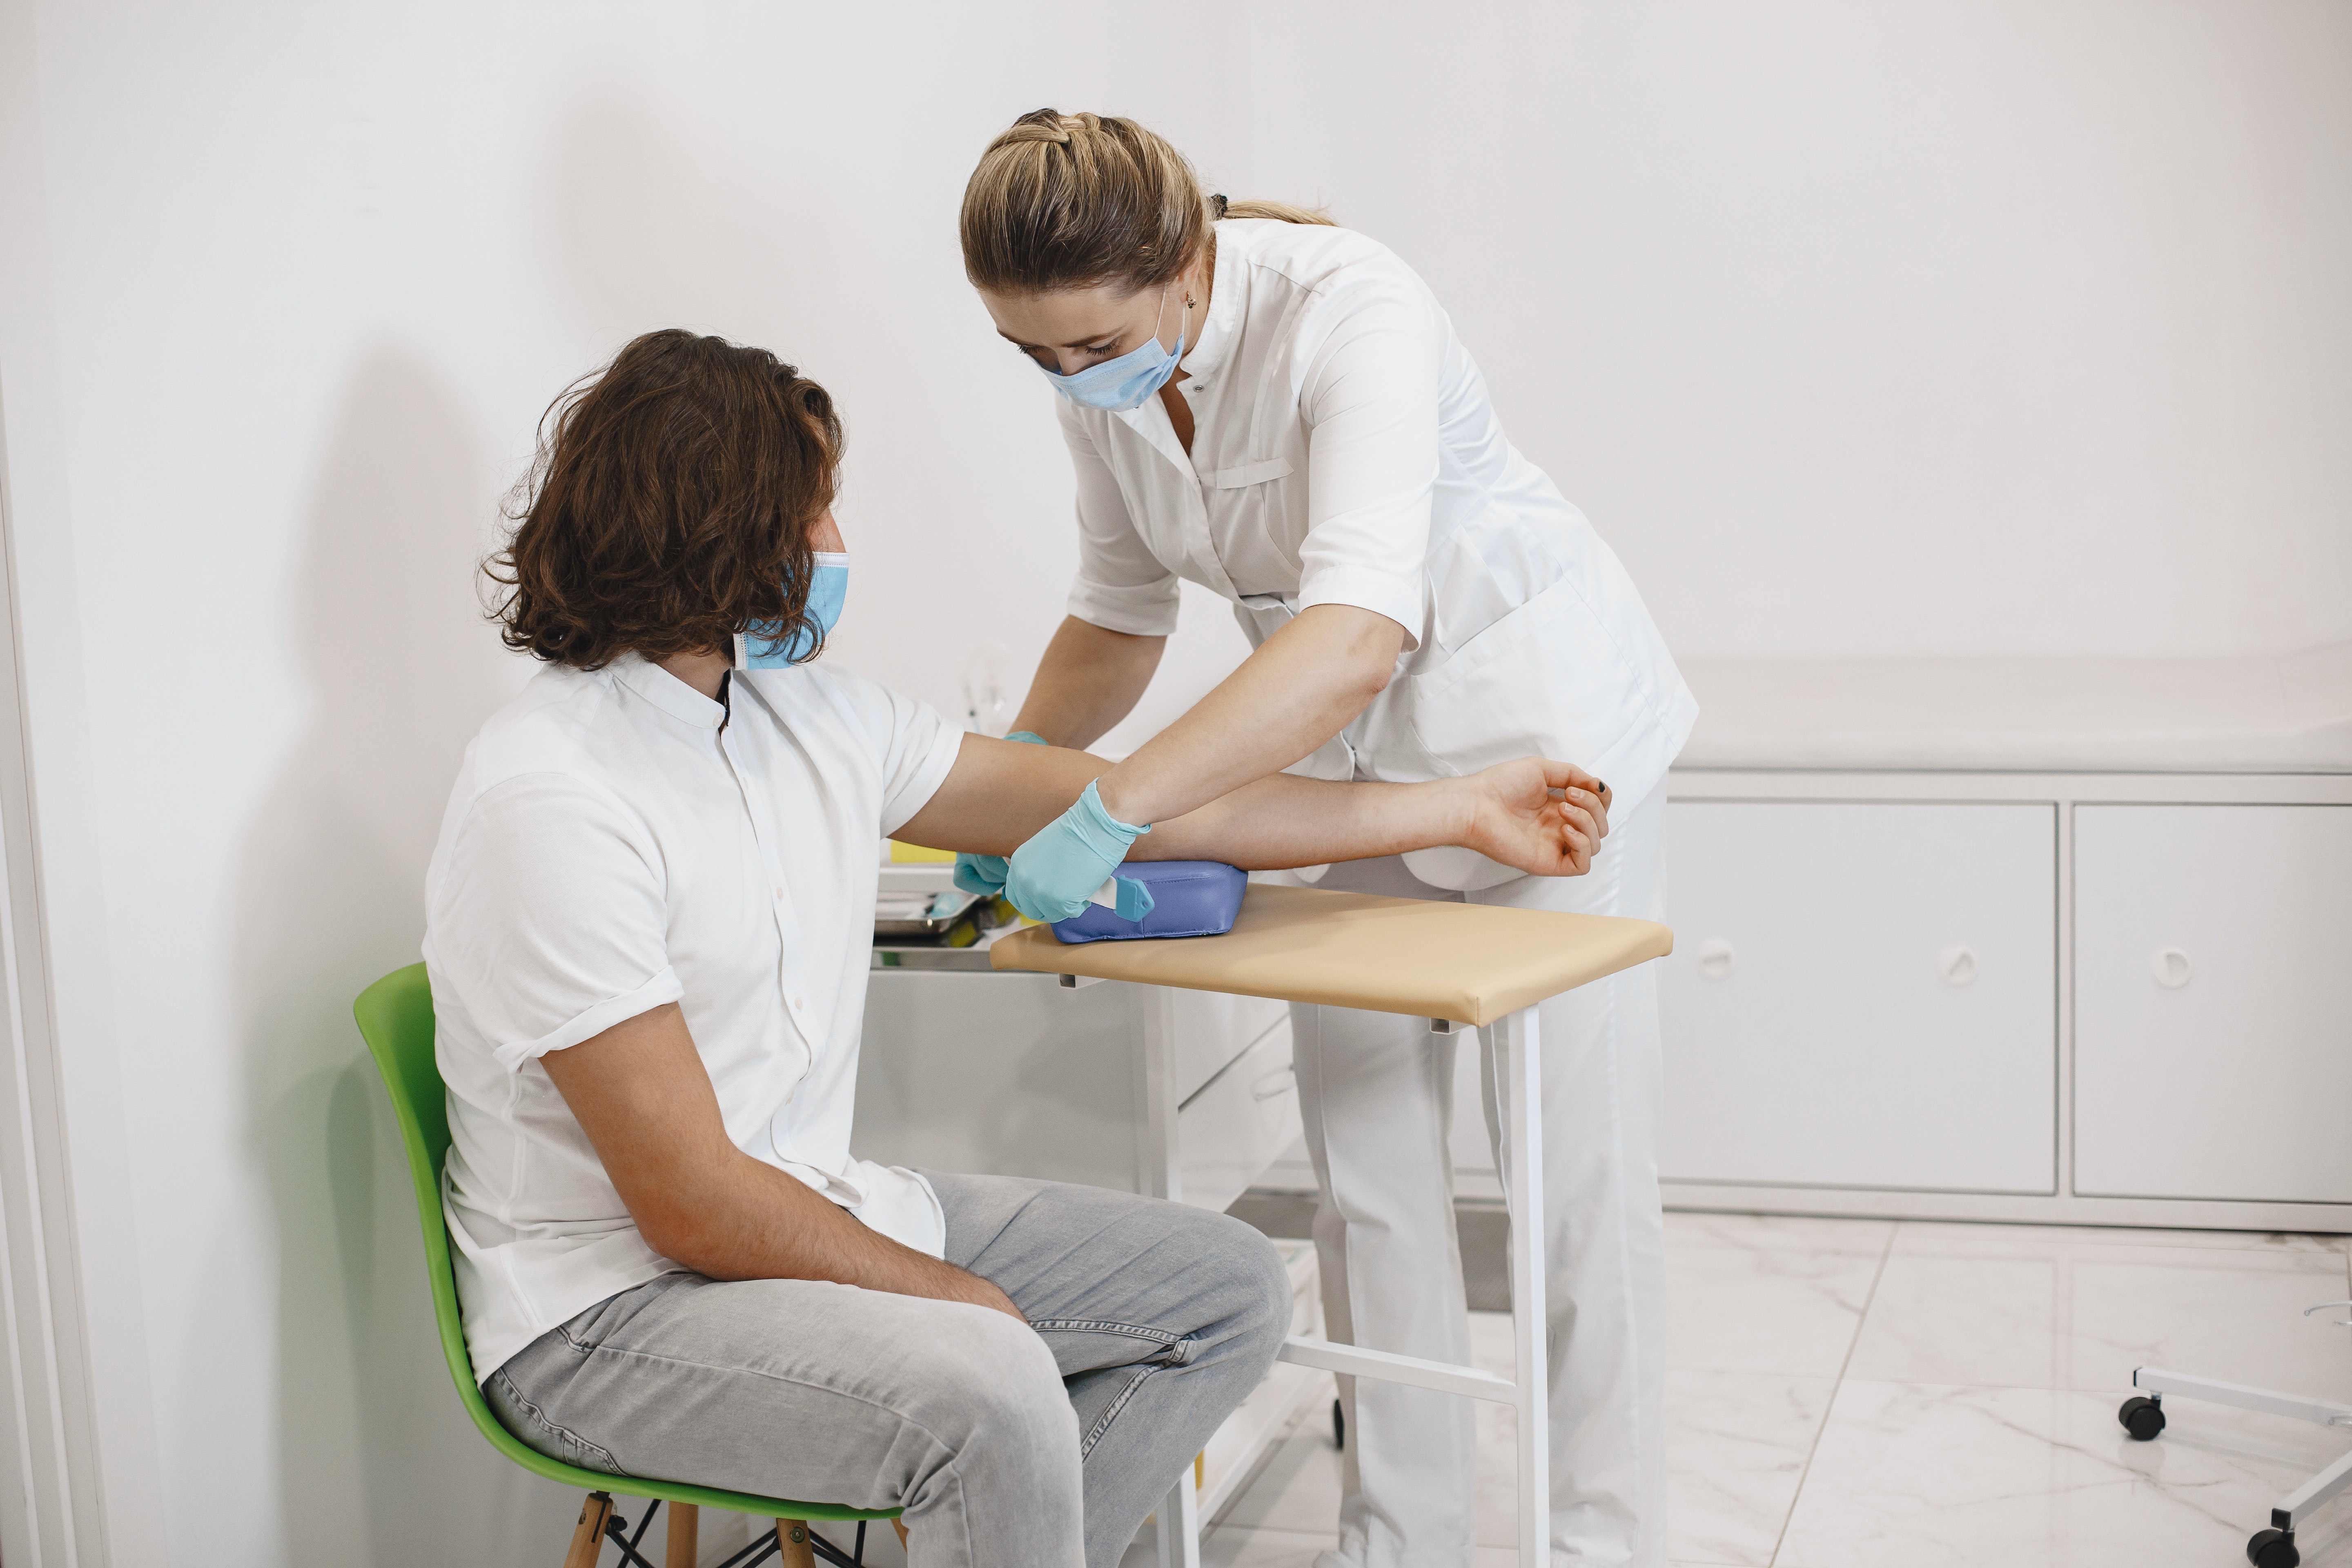 A nurse preparing a seated patient to draw blood. Both are wearing blue masks and white shirts.